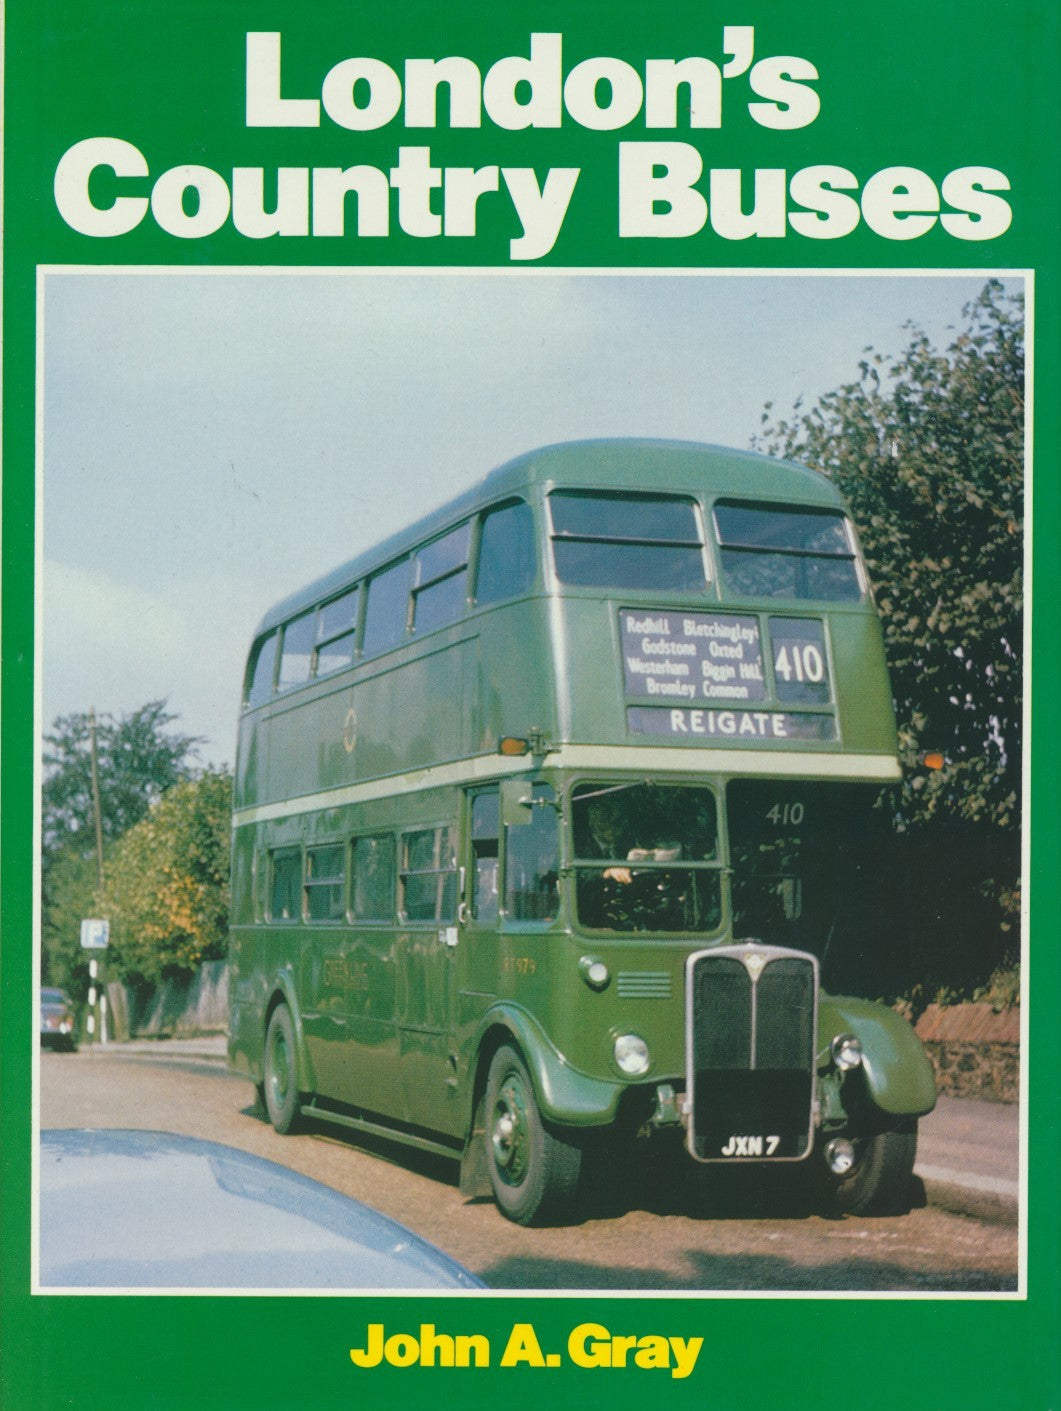 London's Country Buses